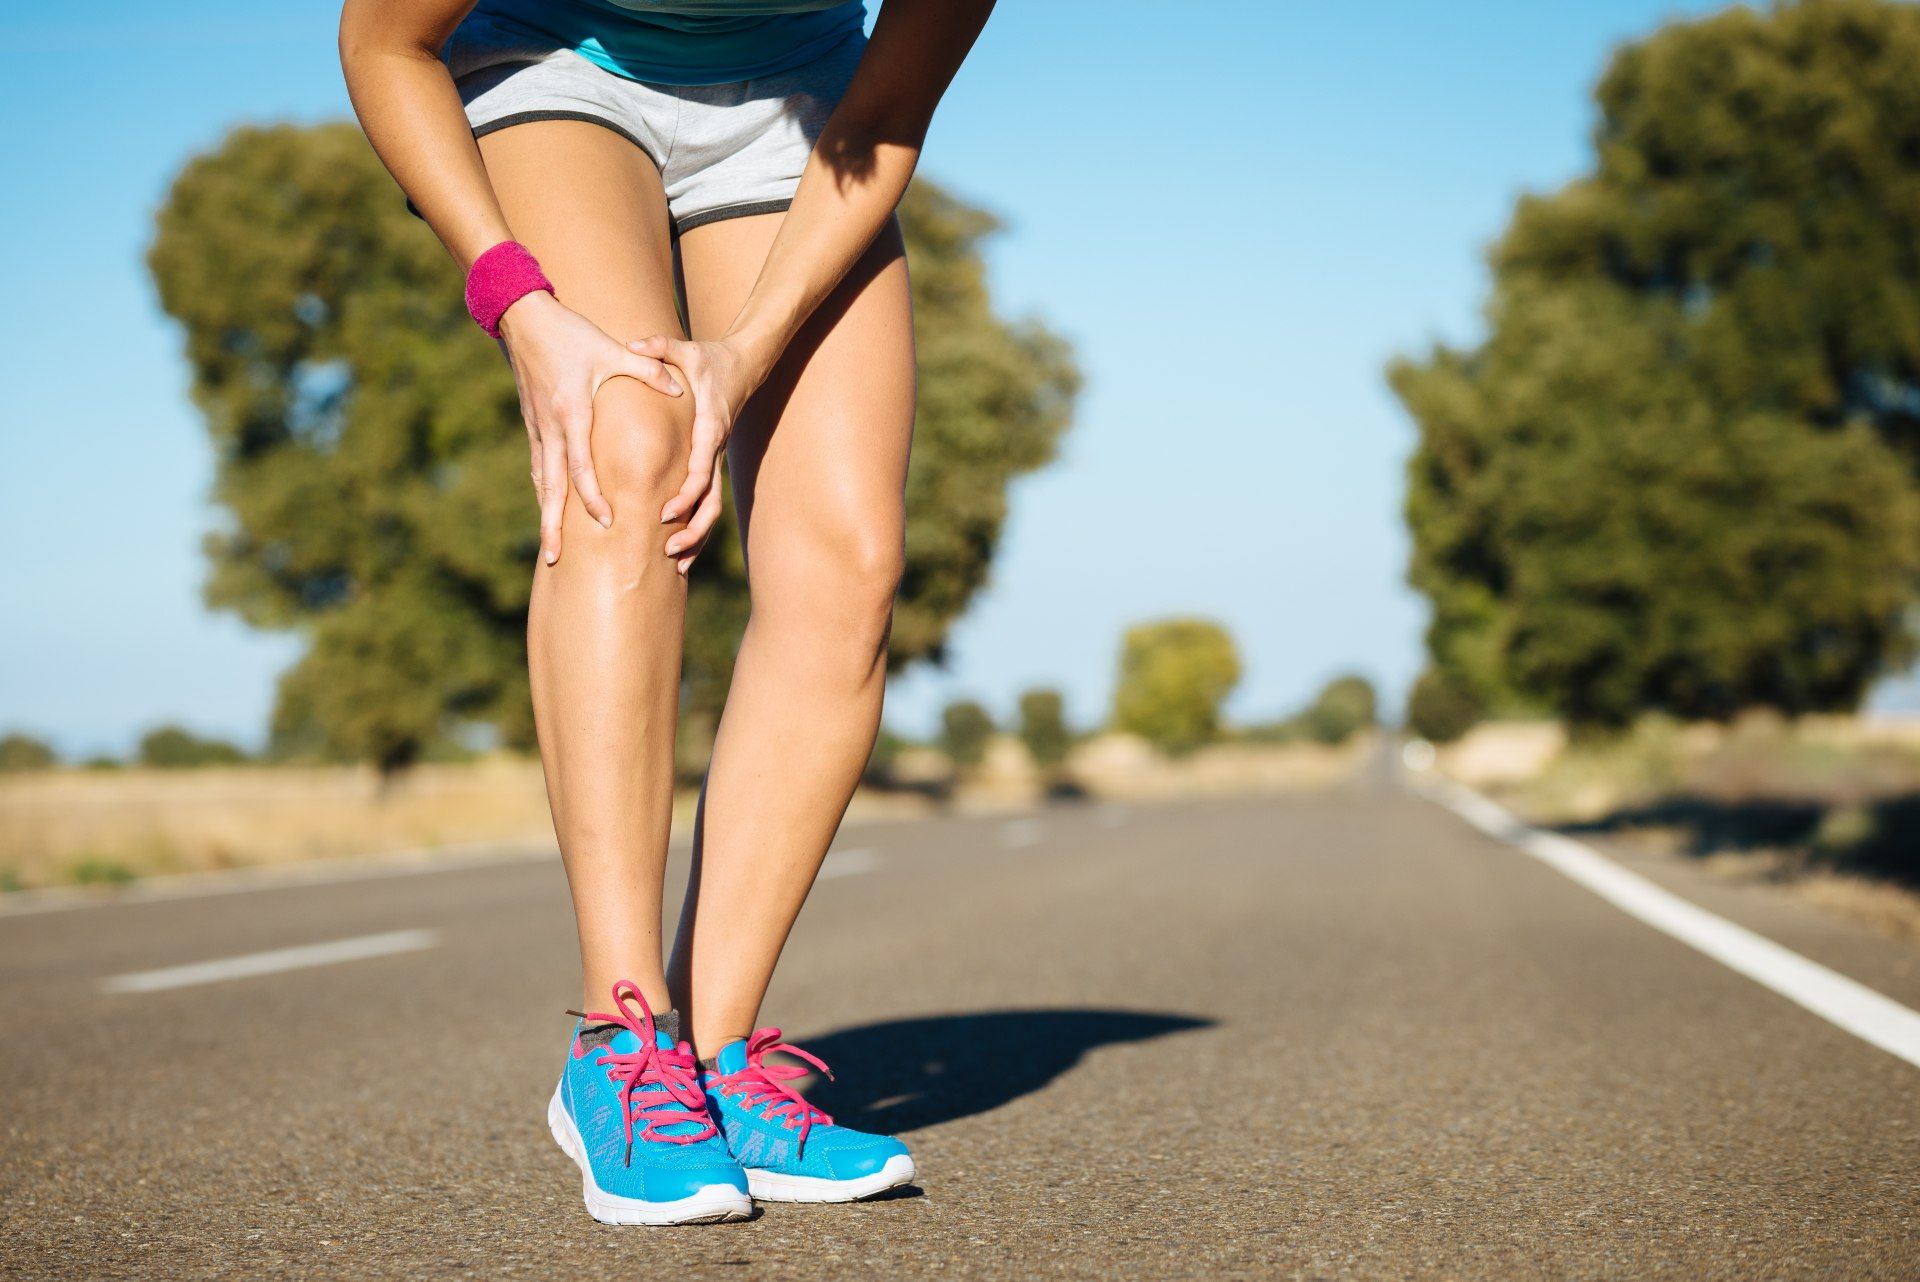 A runner grabs her knee in pain - move free supplements